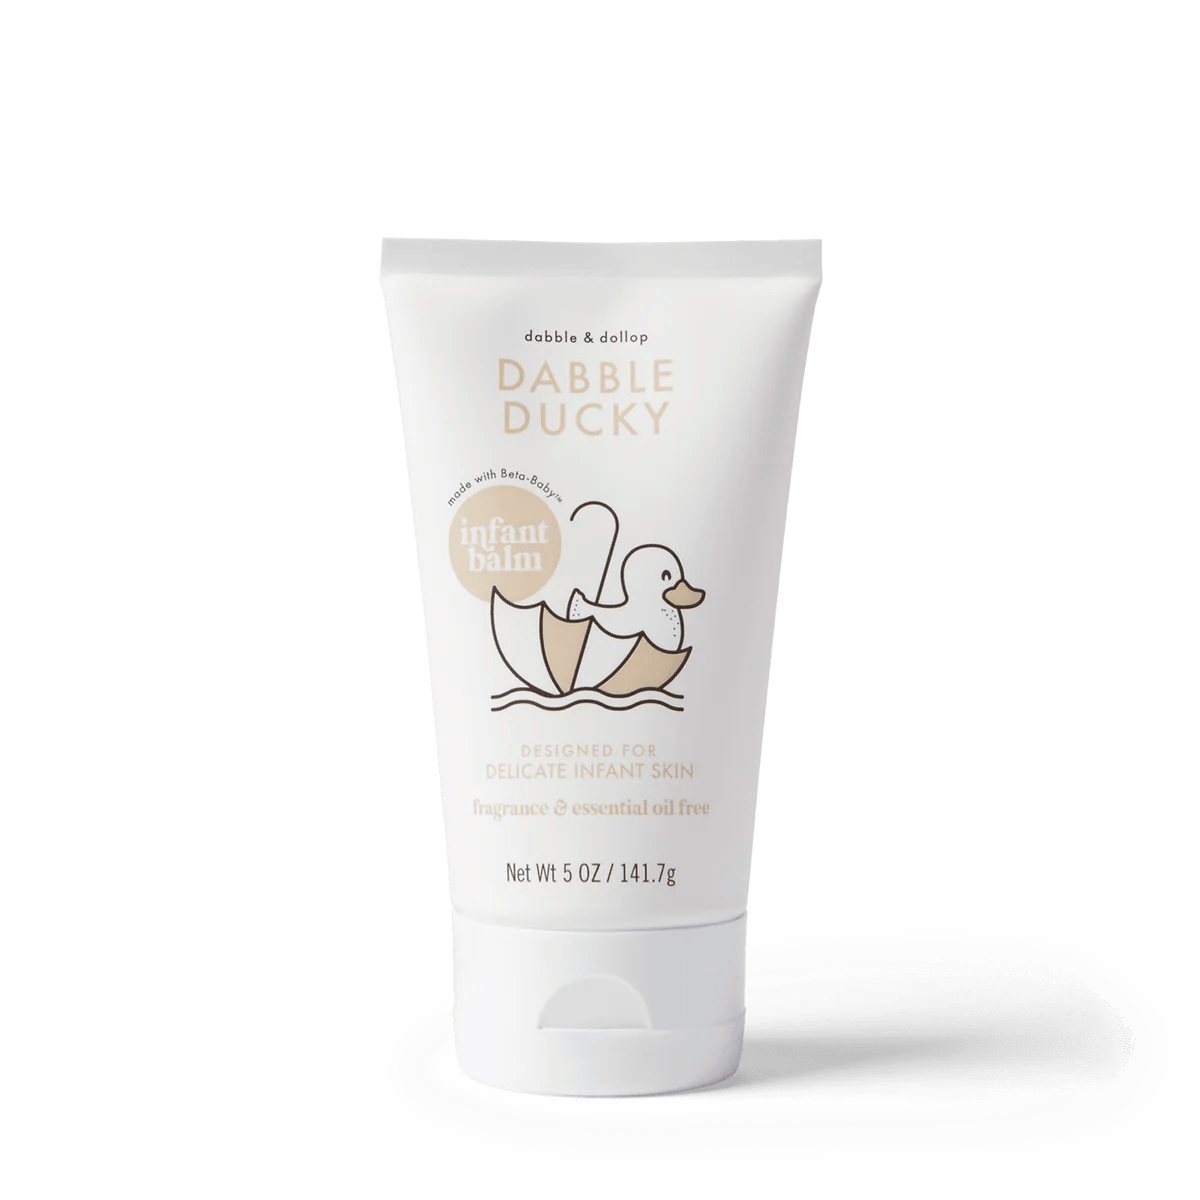 Dabble and Dollop Home and Bath Pink Dabble and Dollop Fragrance Free Infant Balm (EWG Certified)